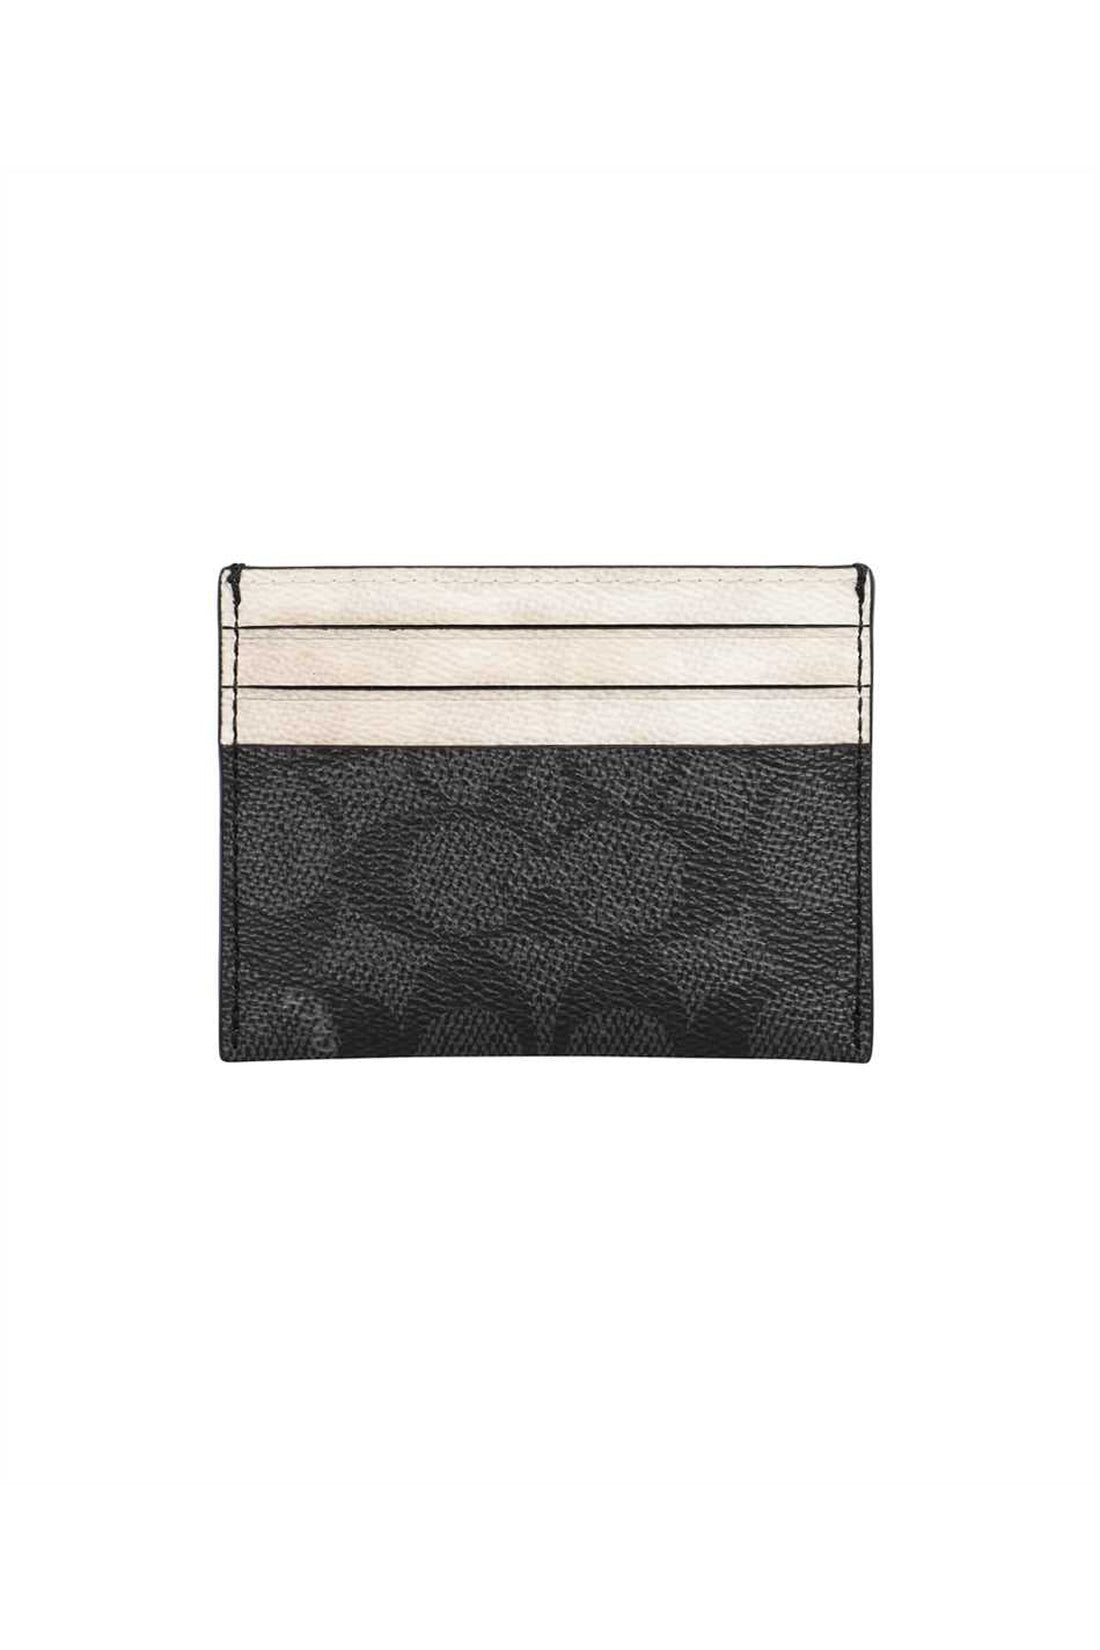 Coach-OUTLET-SALE-Coated canvas card holder-ARCHIVIST